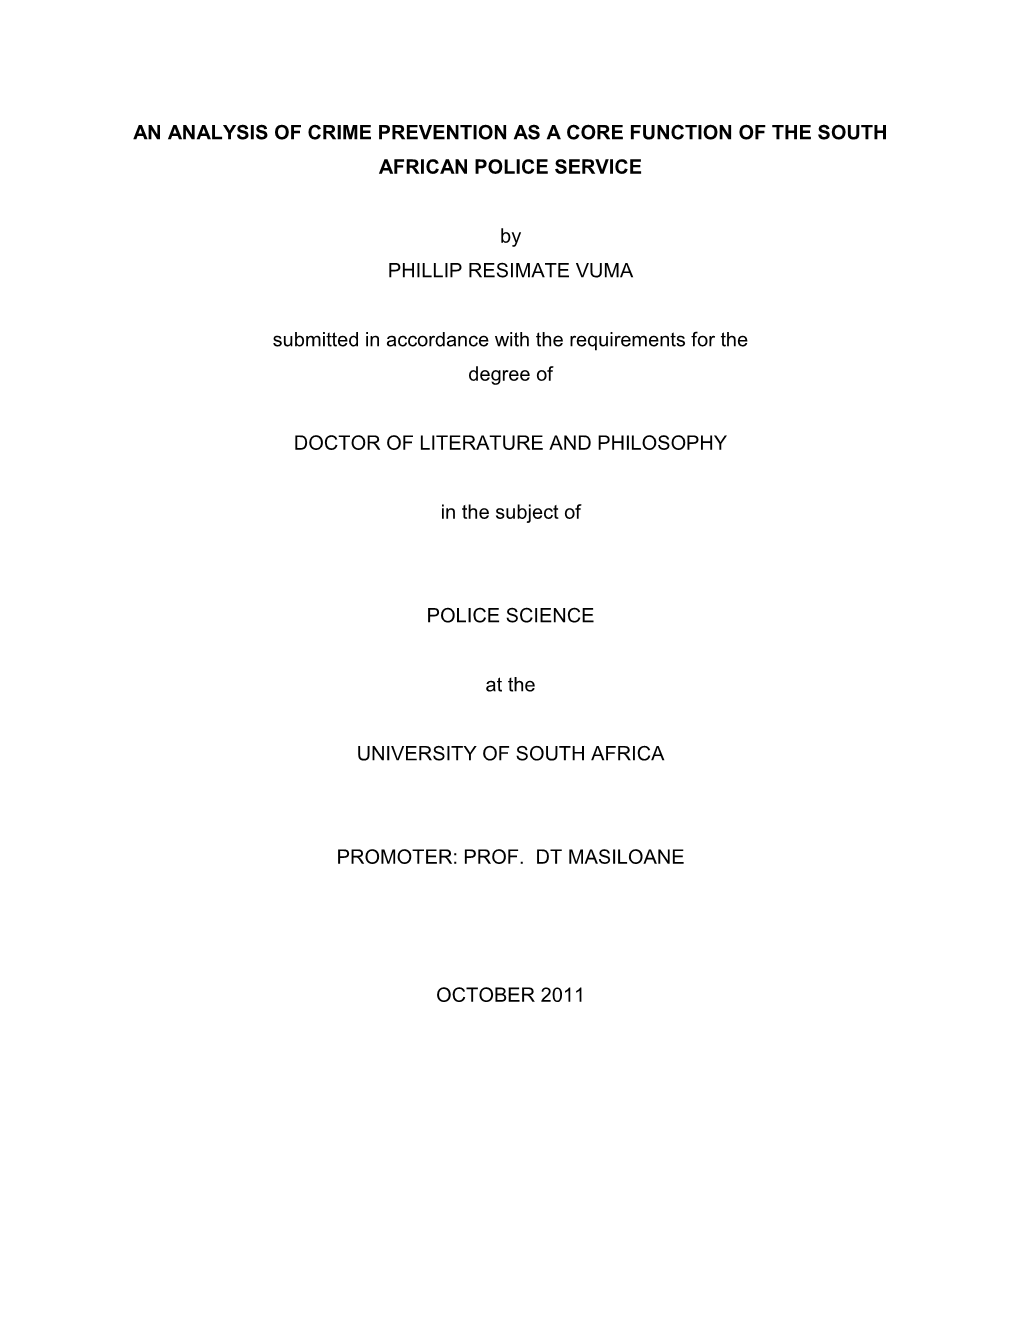 An Analysis of Crime Prevention As a Core Function of the South African Police Service